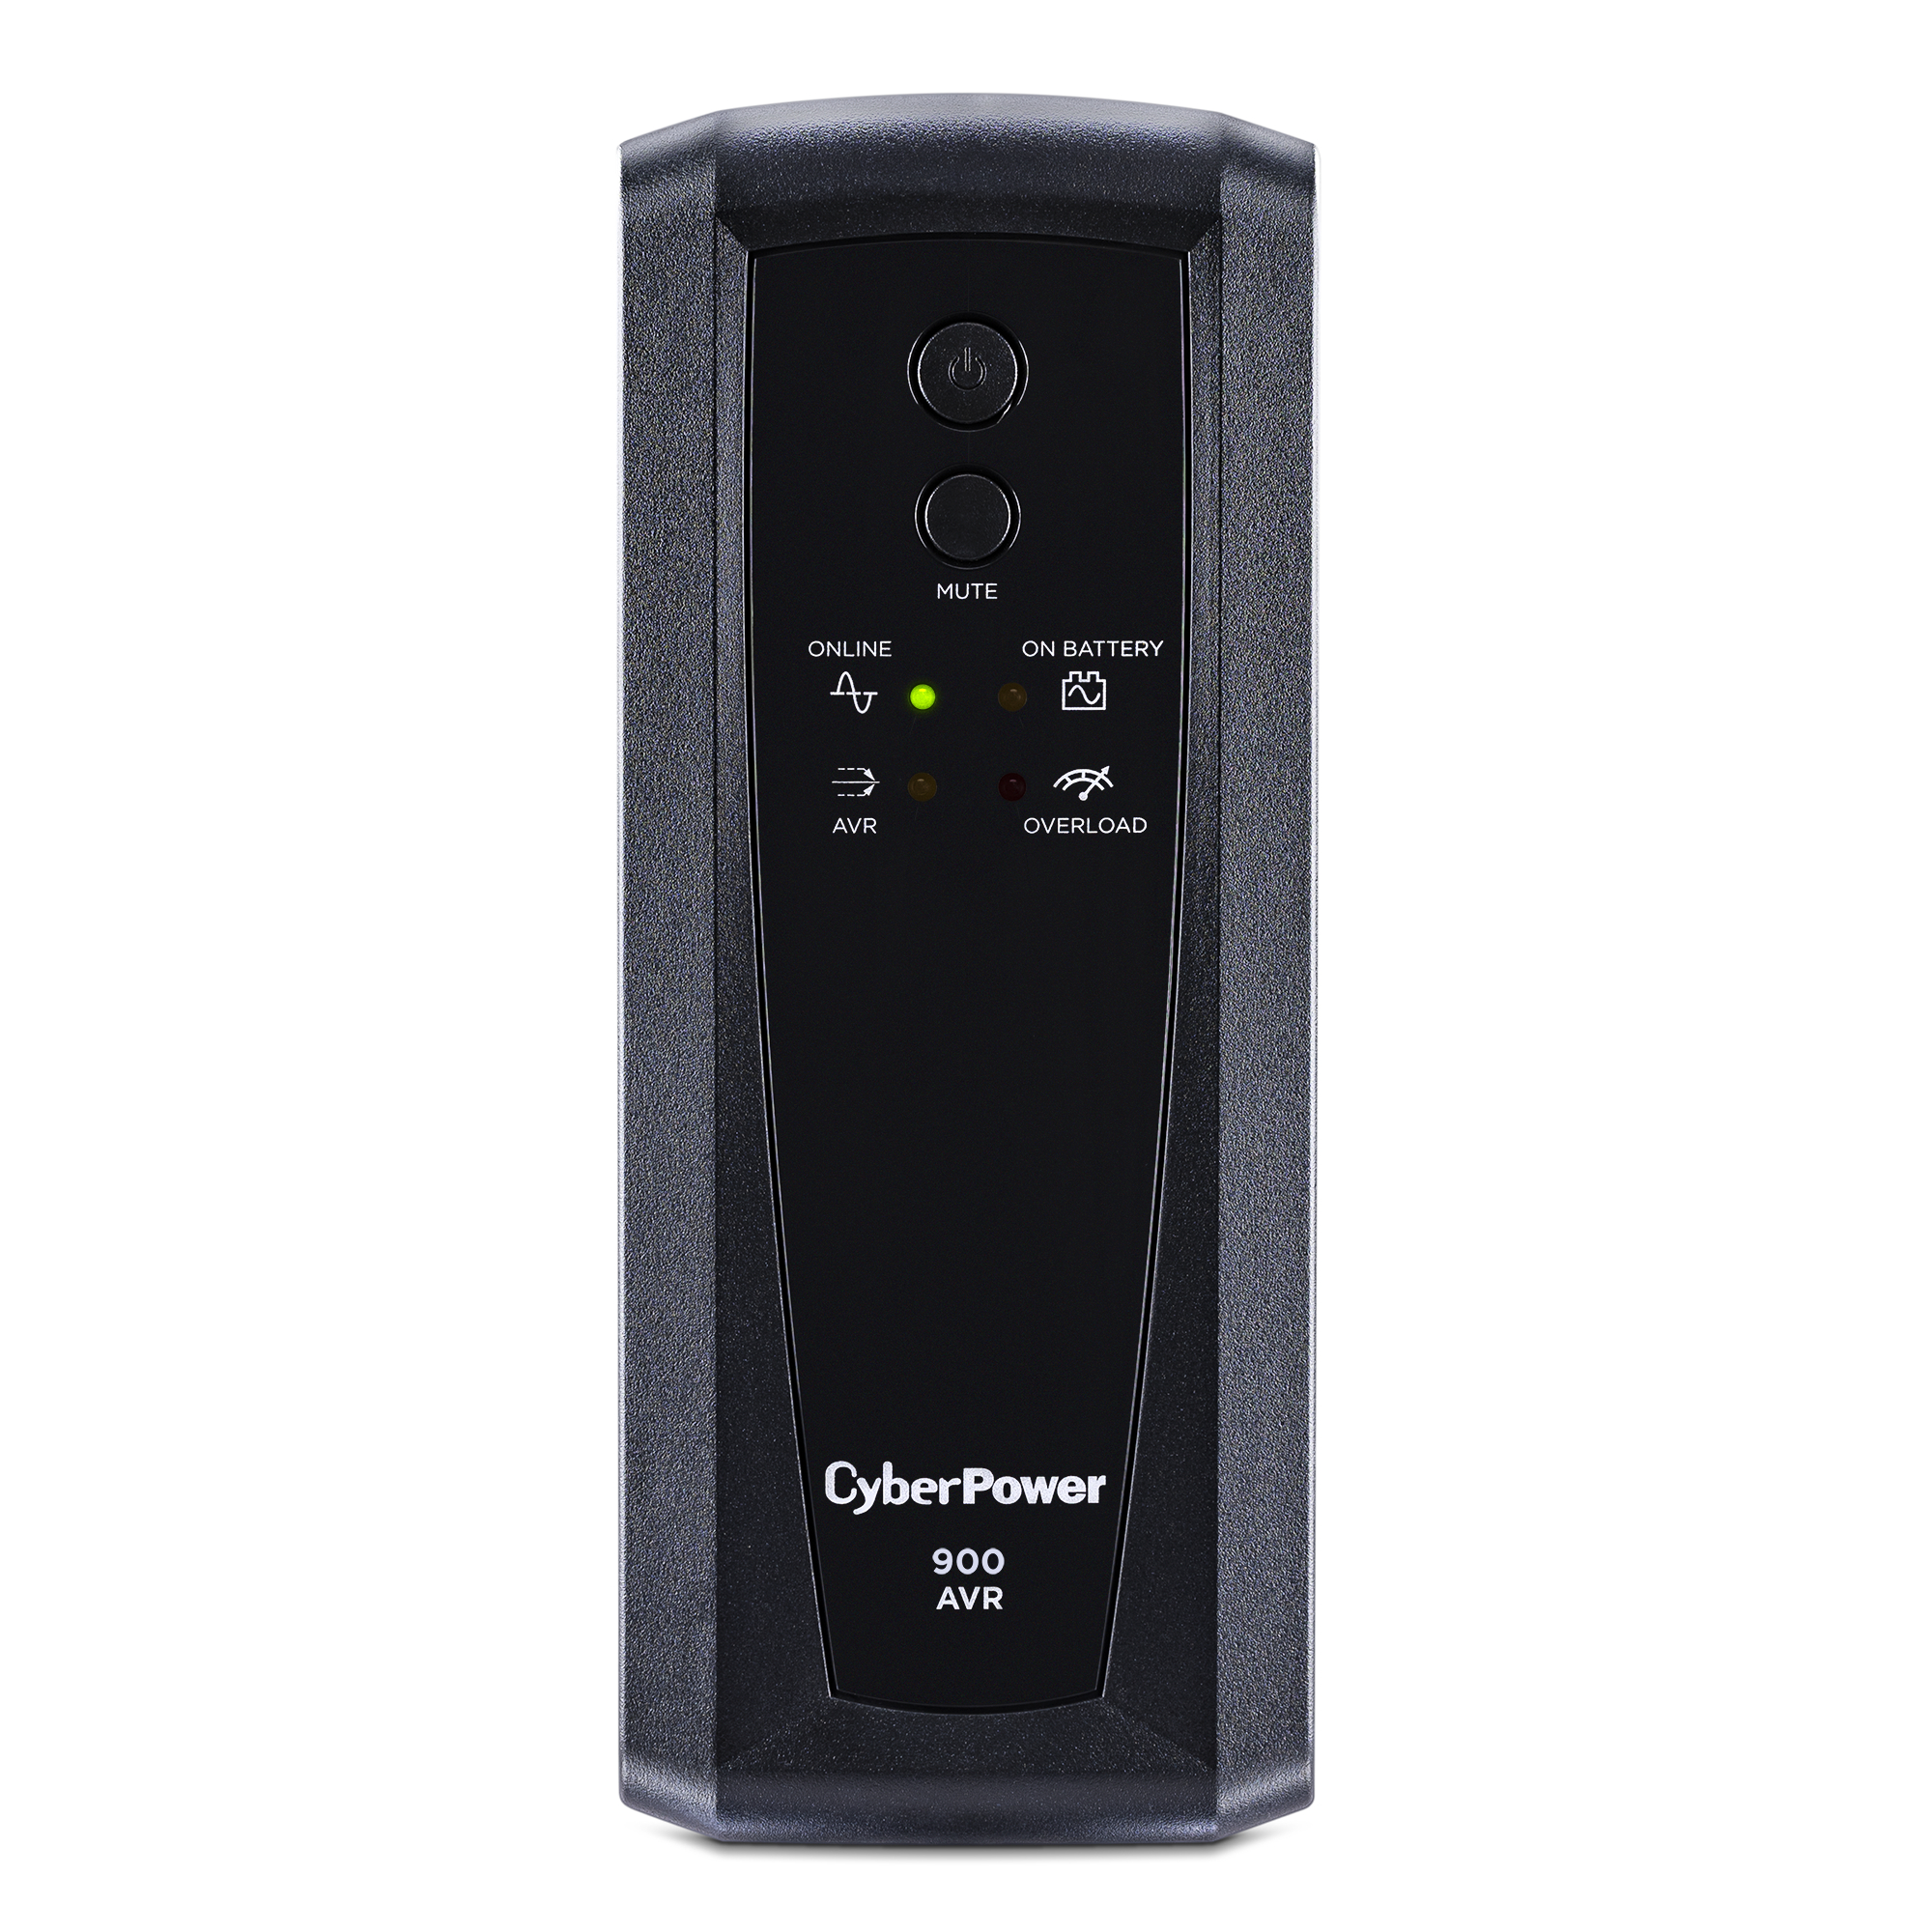 A product image of a CyberPower 900 AVR uninterrupted power supply tower. 